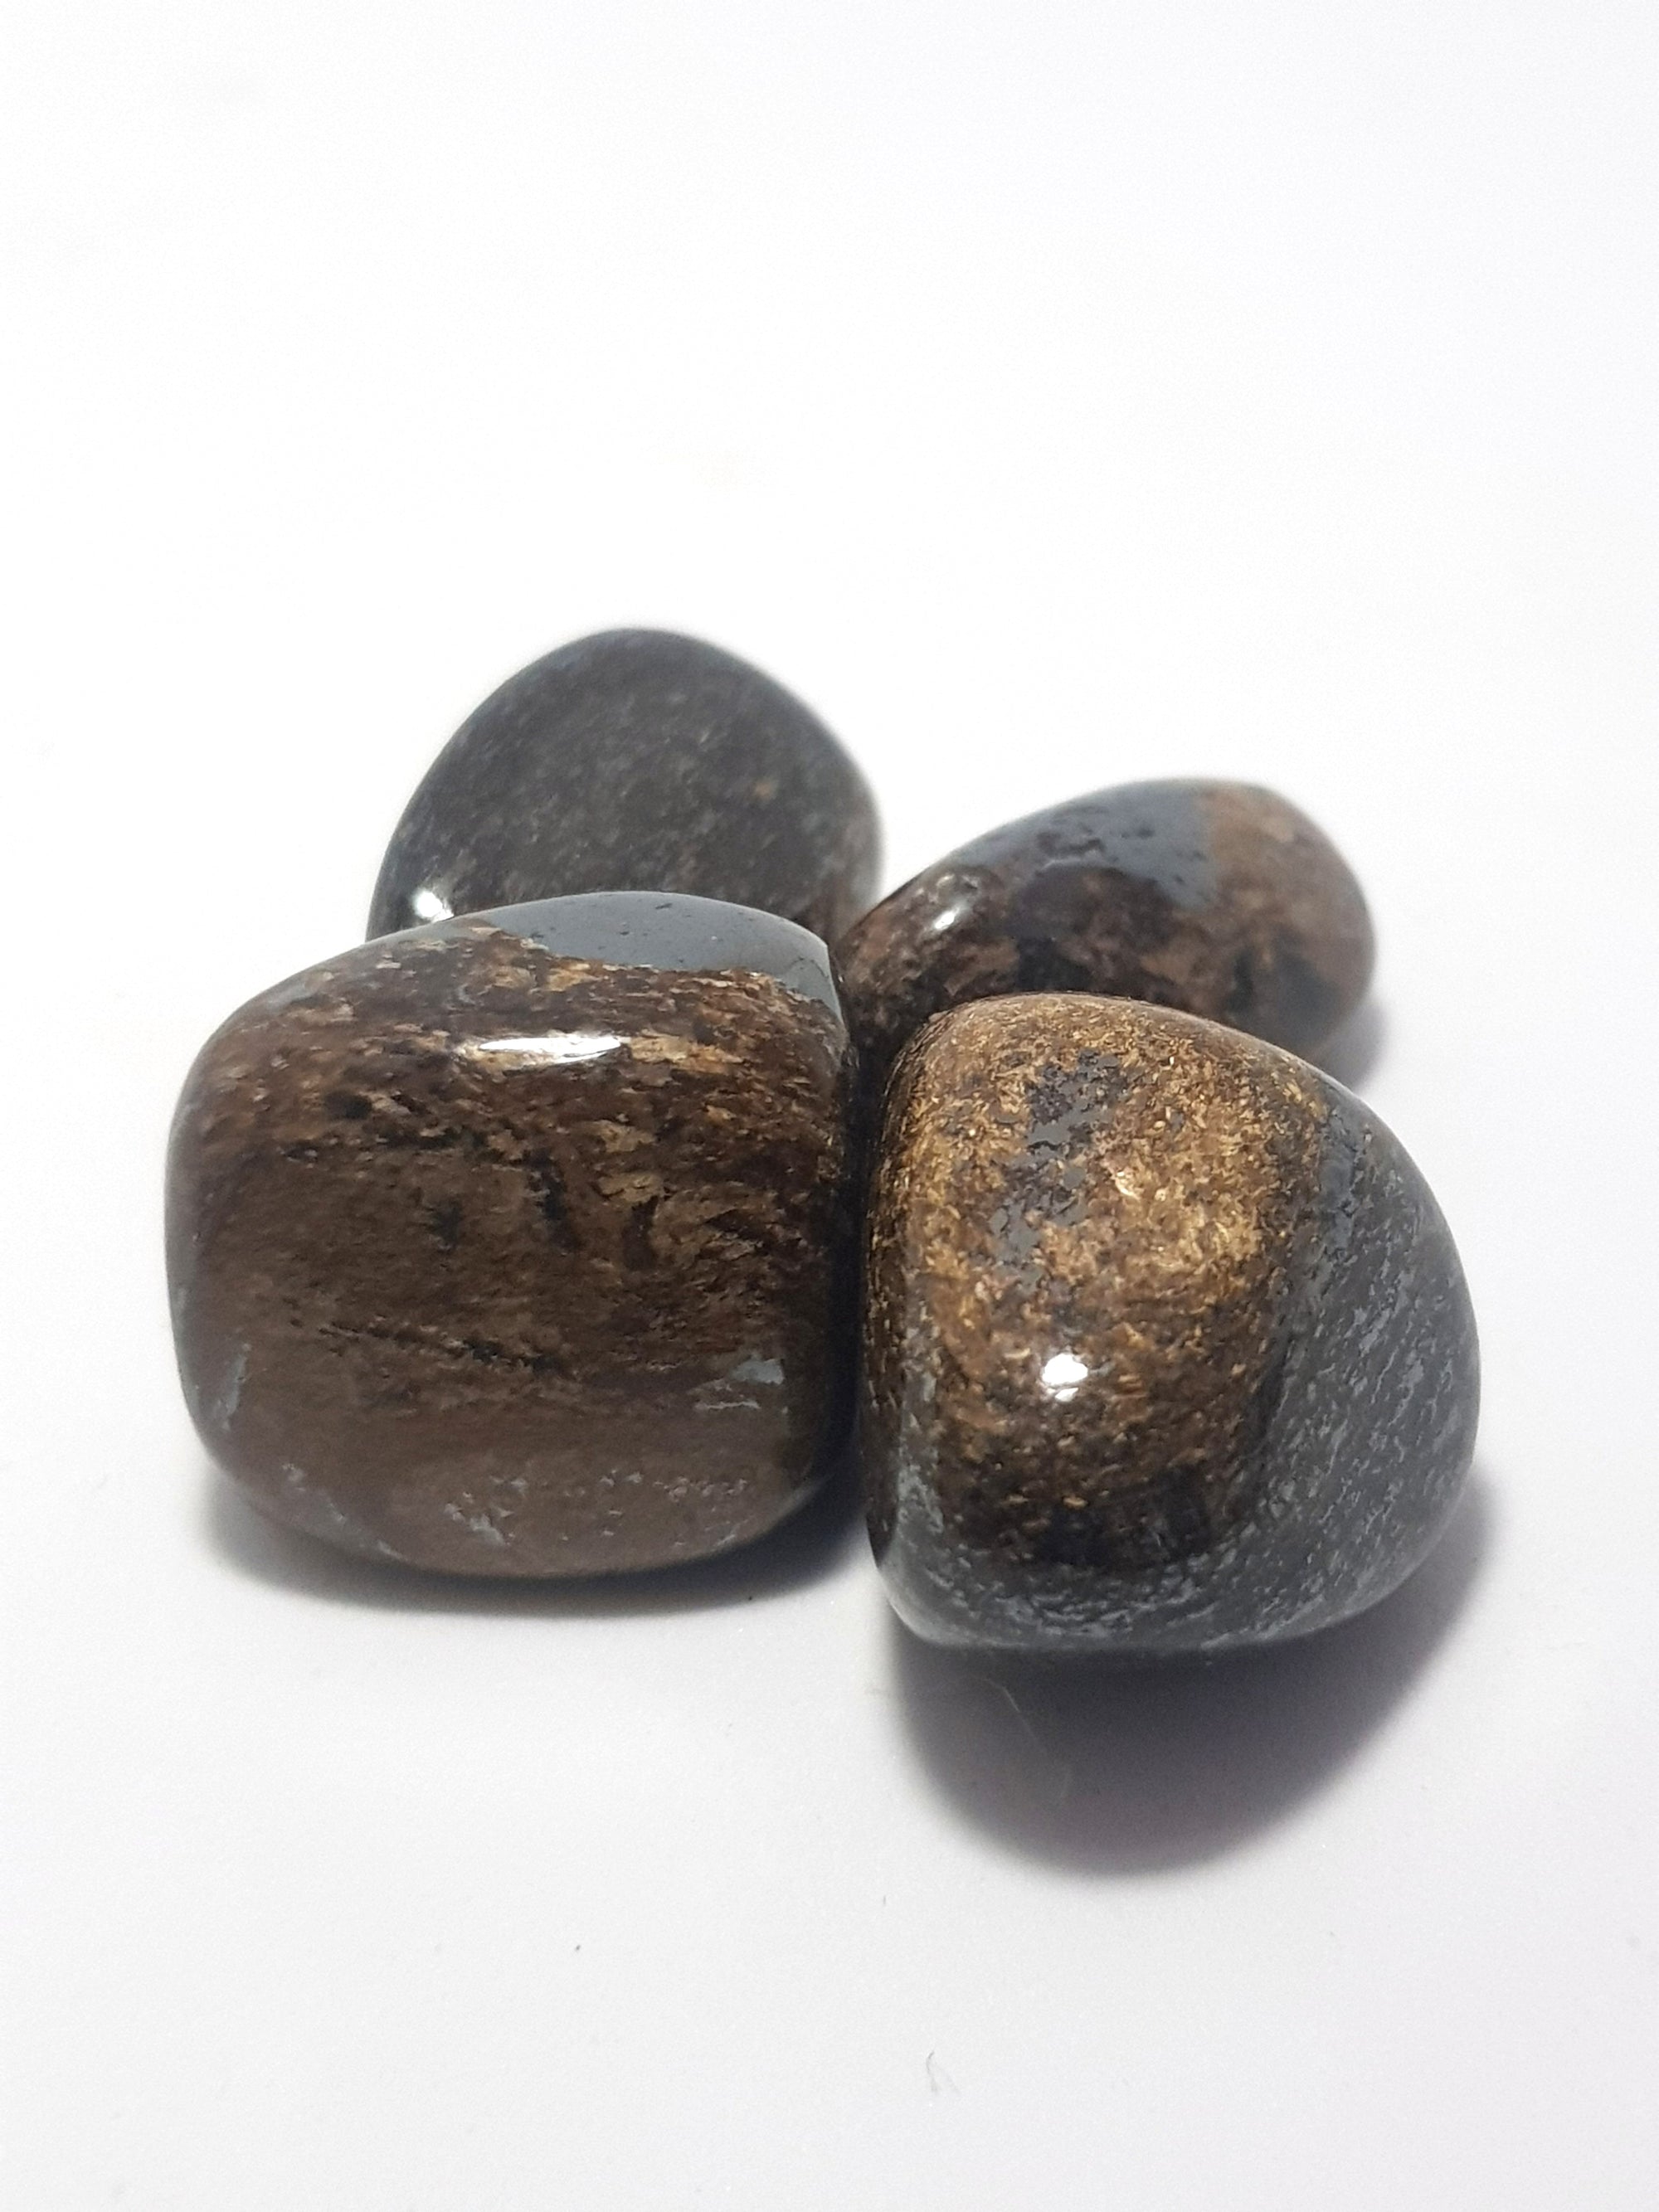 bronzite tumblestones. They are a brownish bronze colour, they appear to be finely laminated, with lines of a darker brown material. They show some chatoyancy.